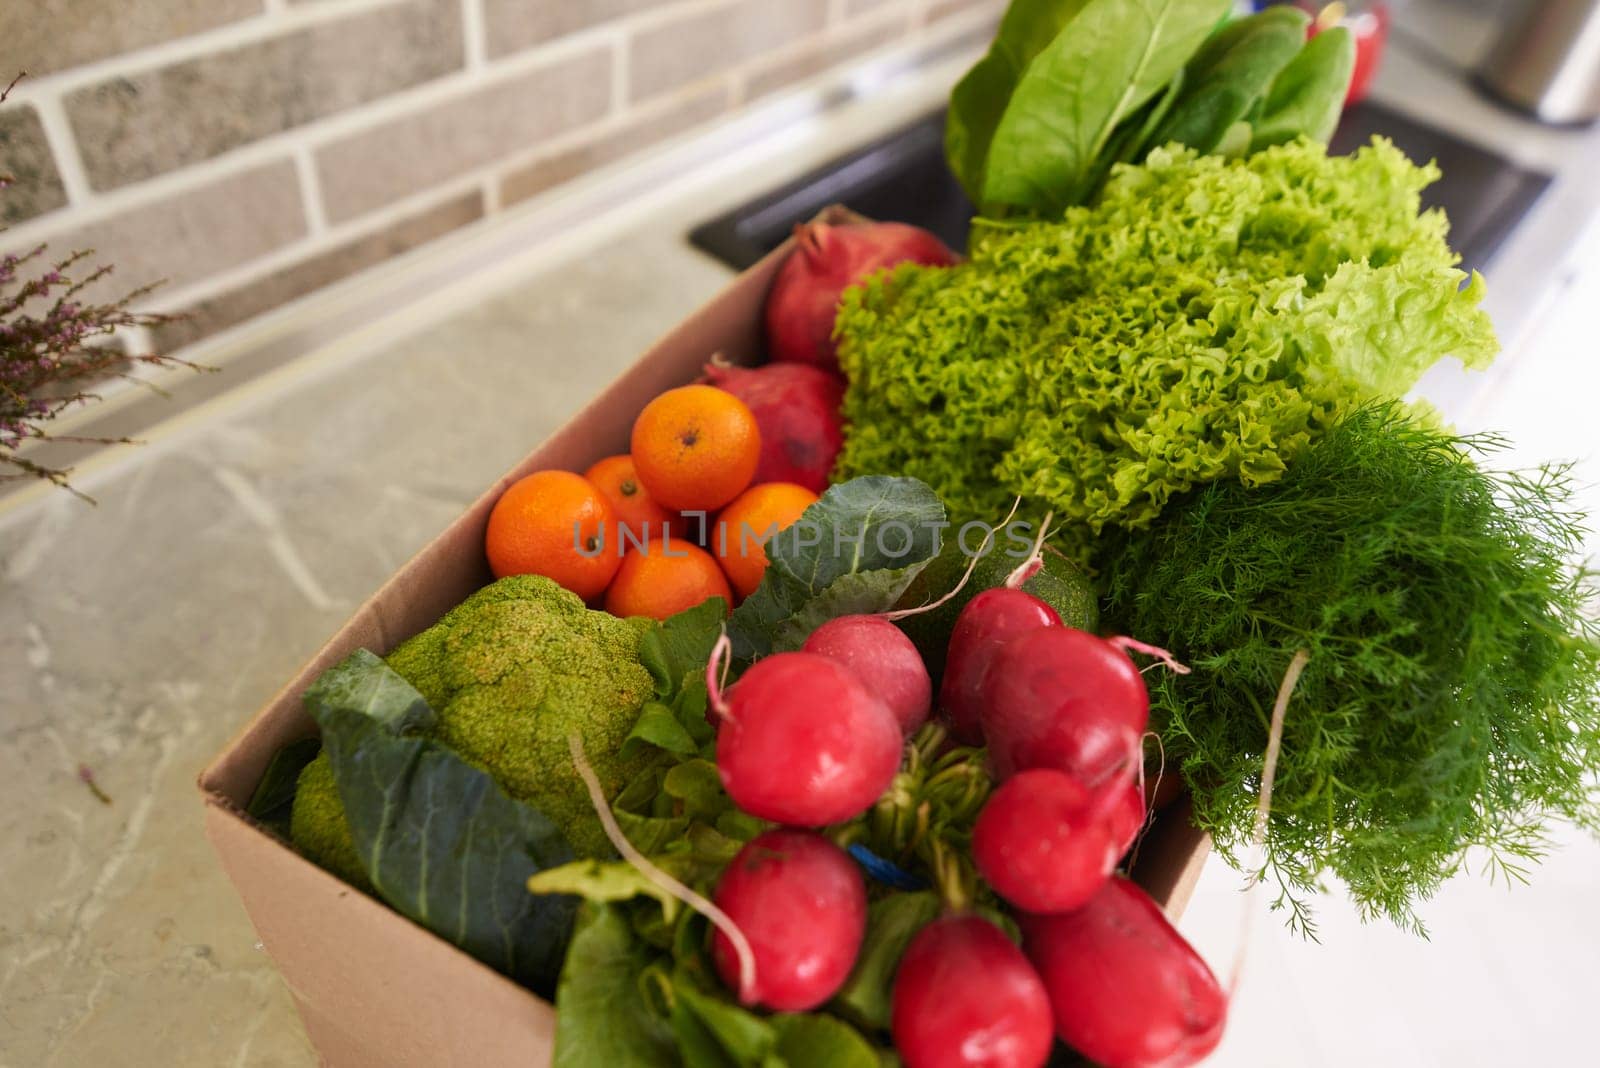 Top view recyclable cardboard box with fresh organic crop of fruits, vegetables and greens on the kitchen counter by artgf